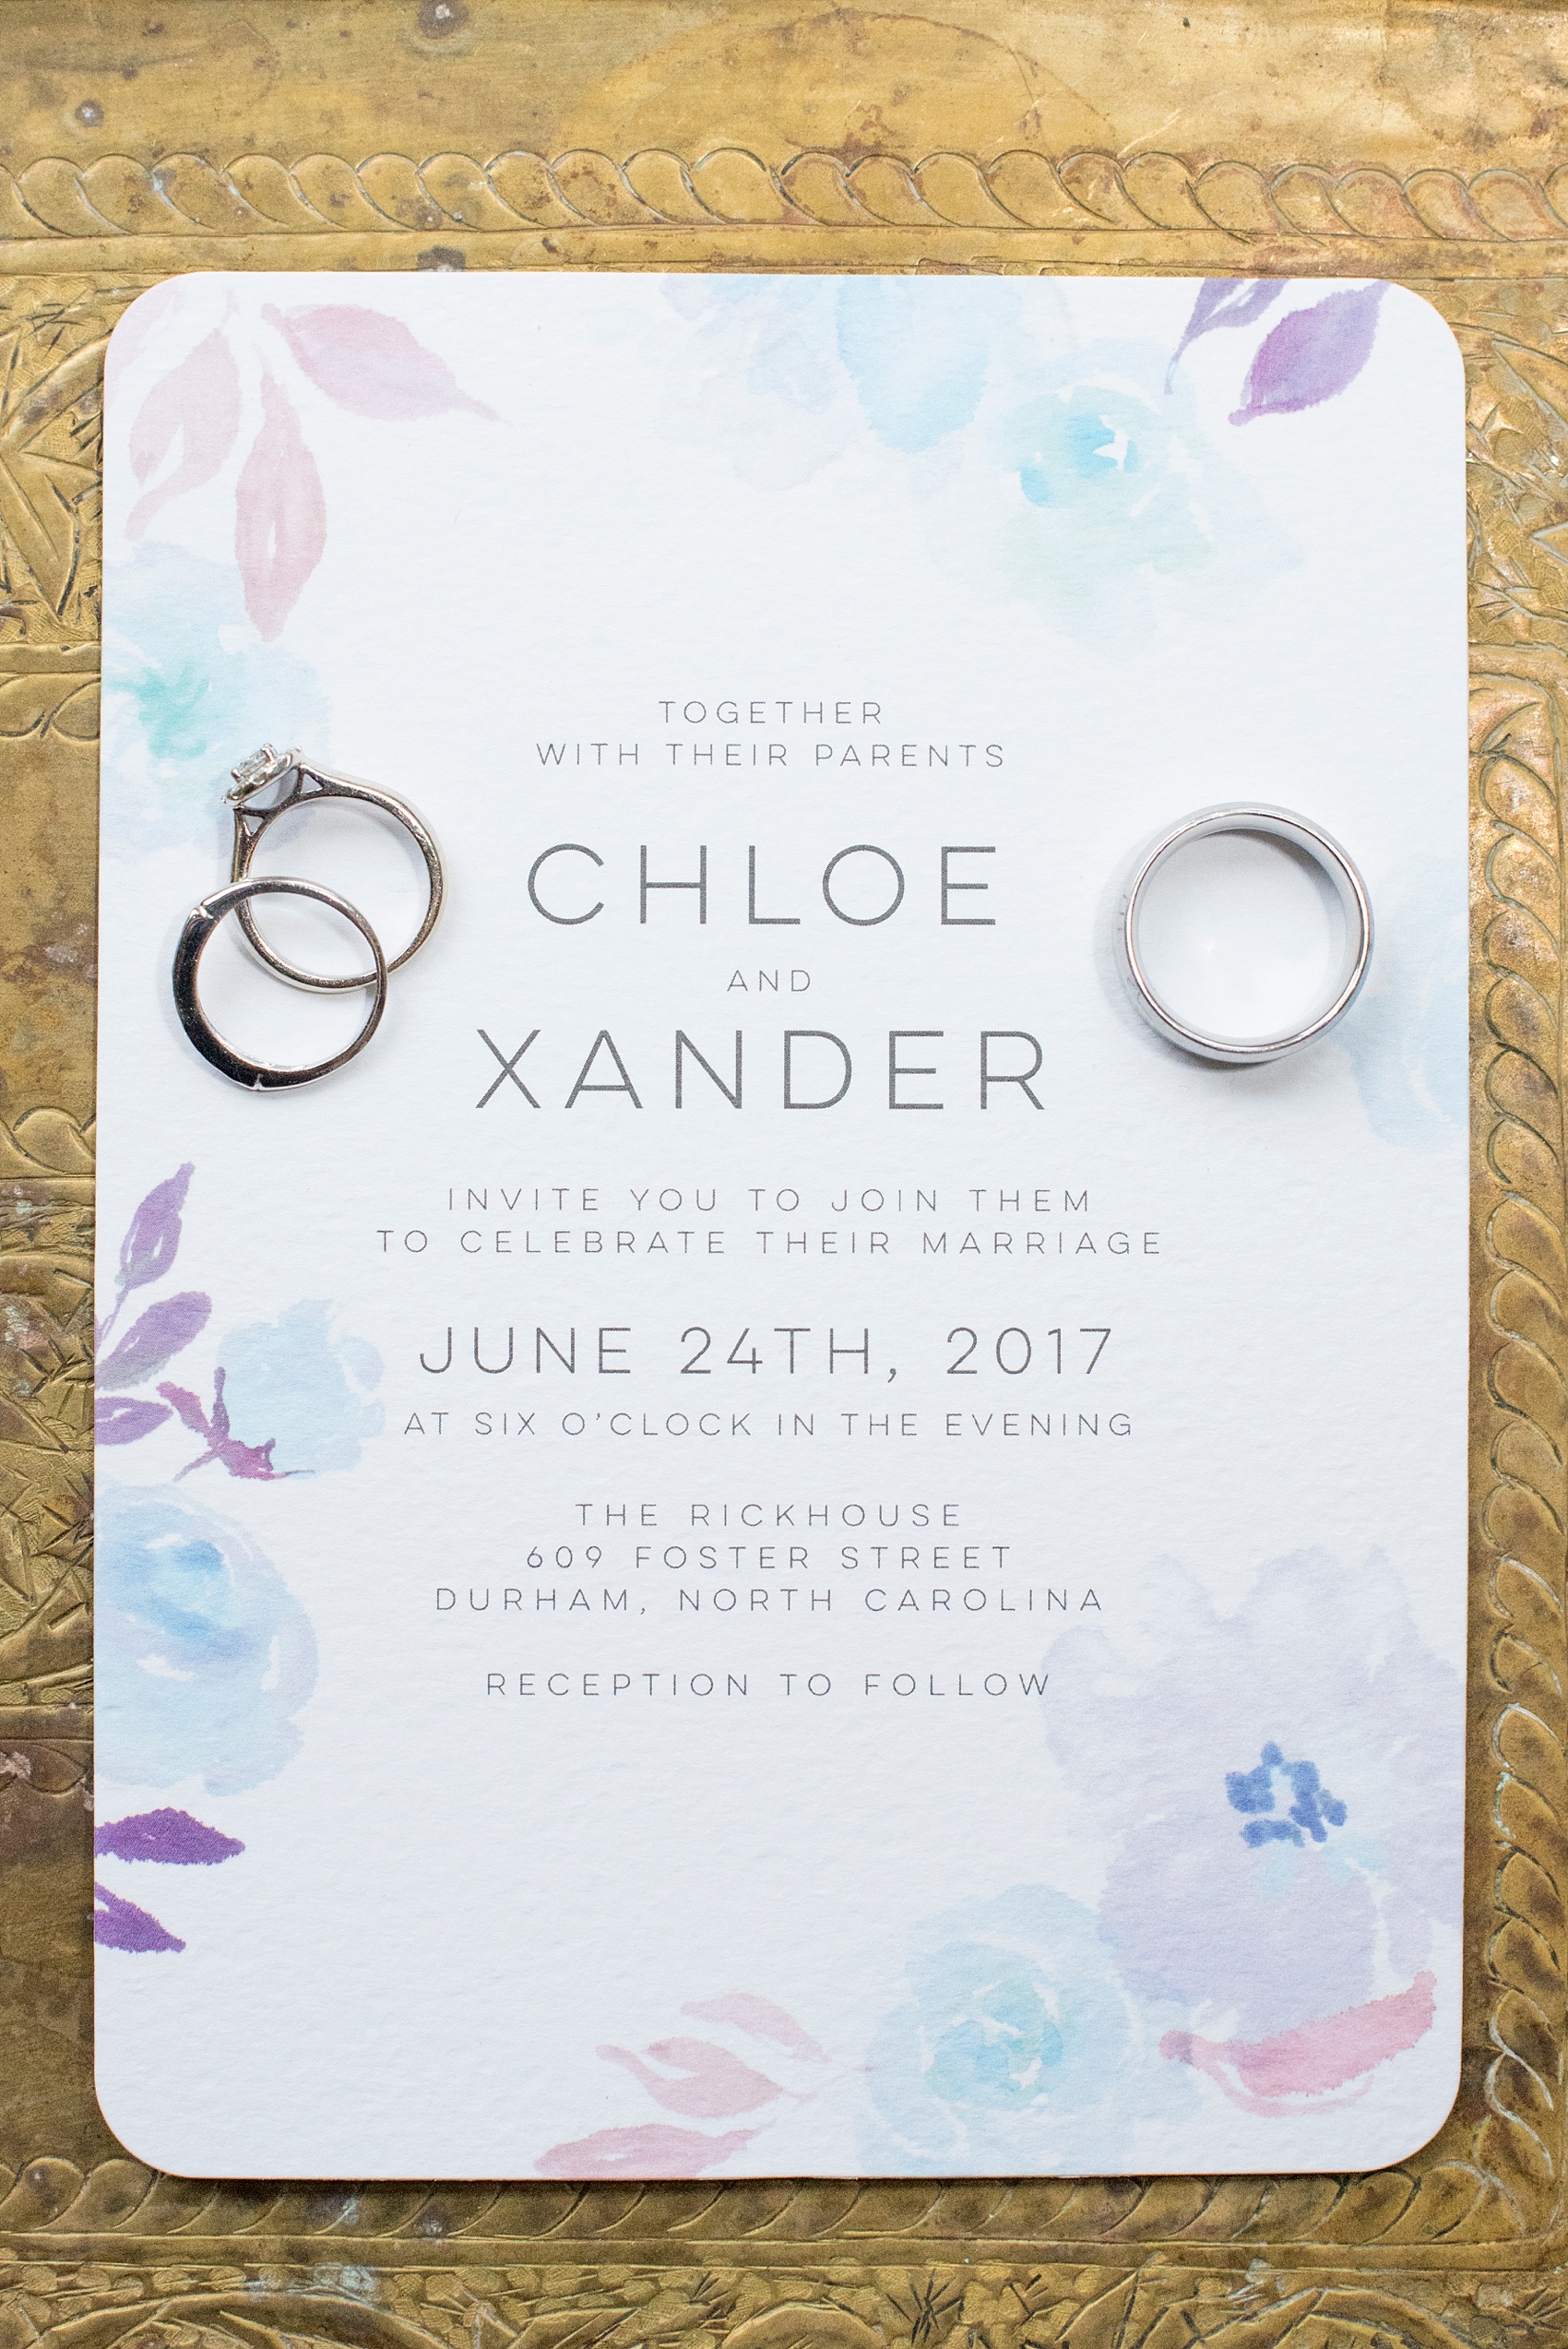 The Rickhouse Durham wedding photos by Mikkel Paige Photography. North Carolina celebration with a detail picture of the watercolor invitation and rings.